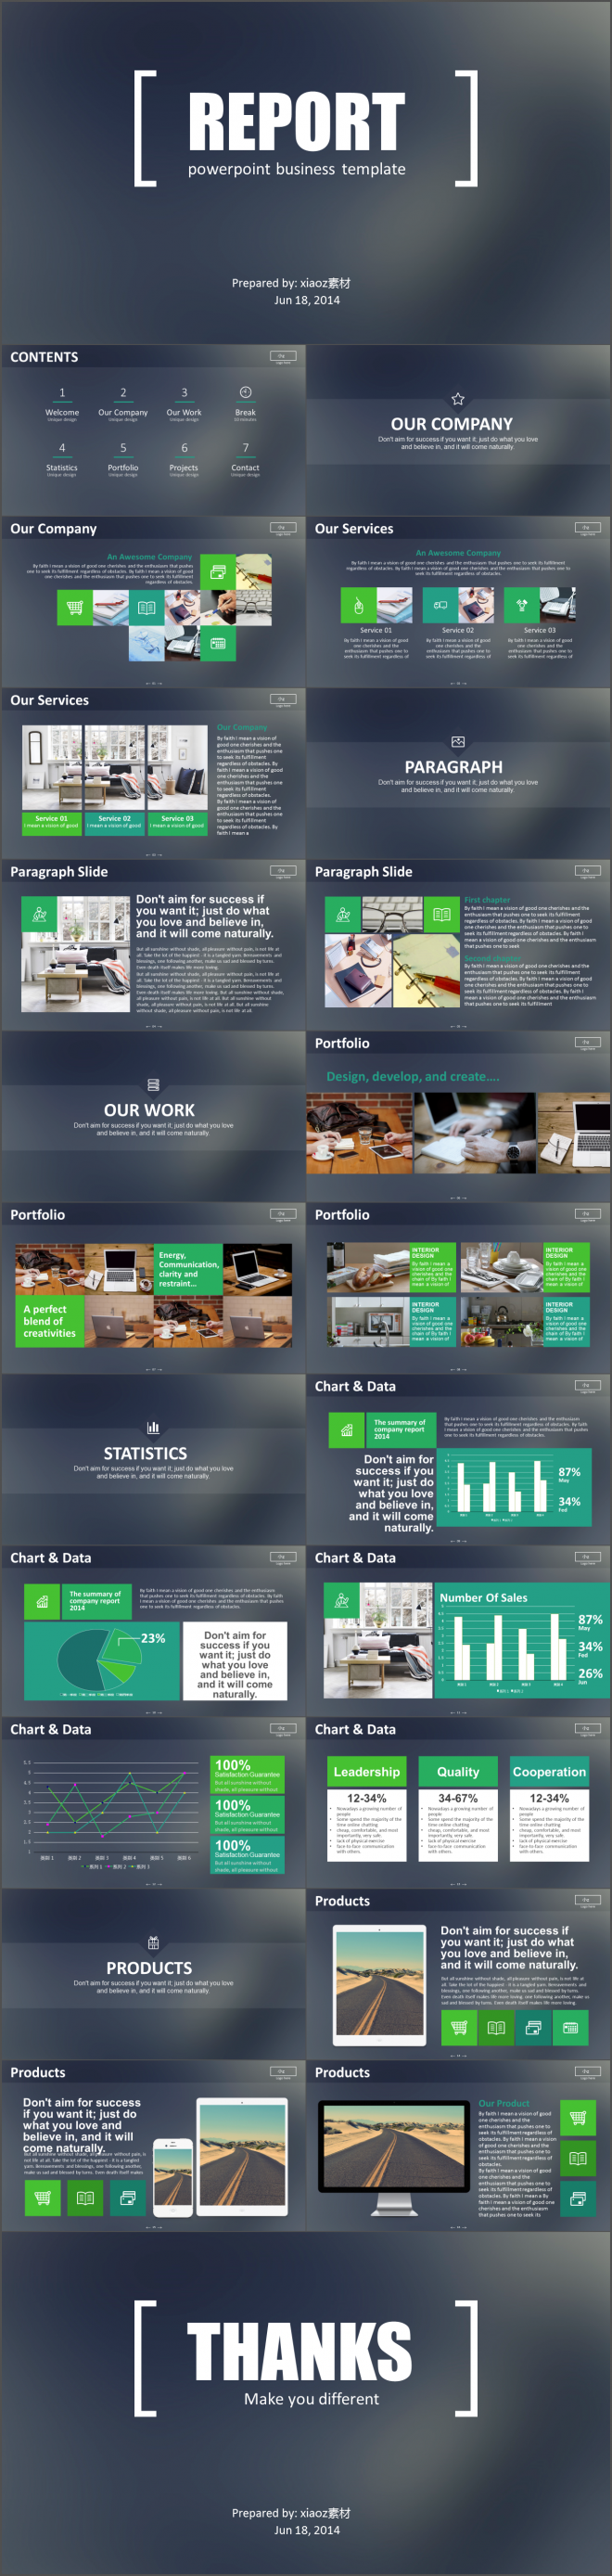 ppt 商务 business template